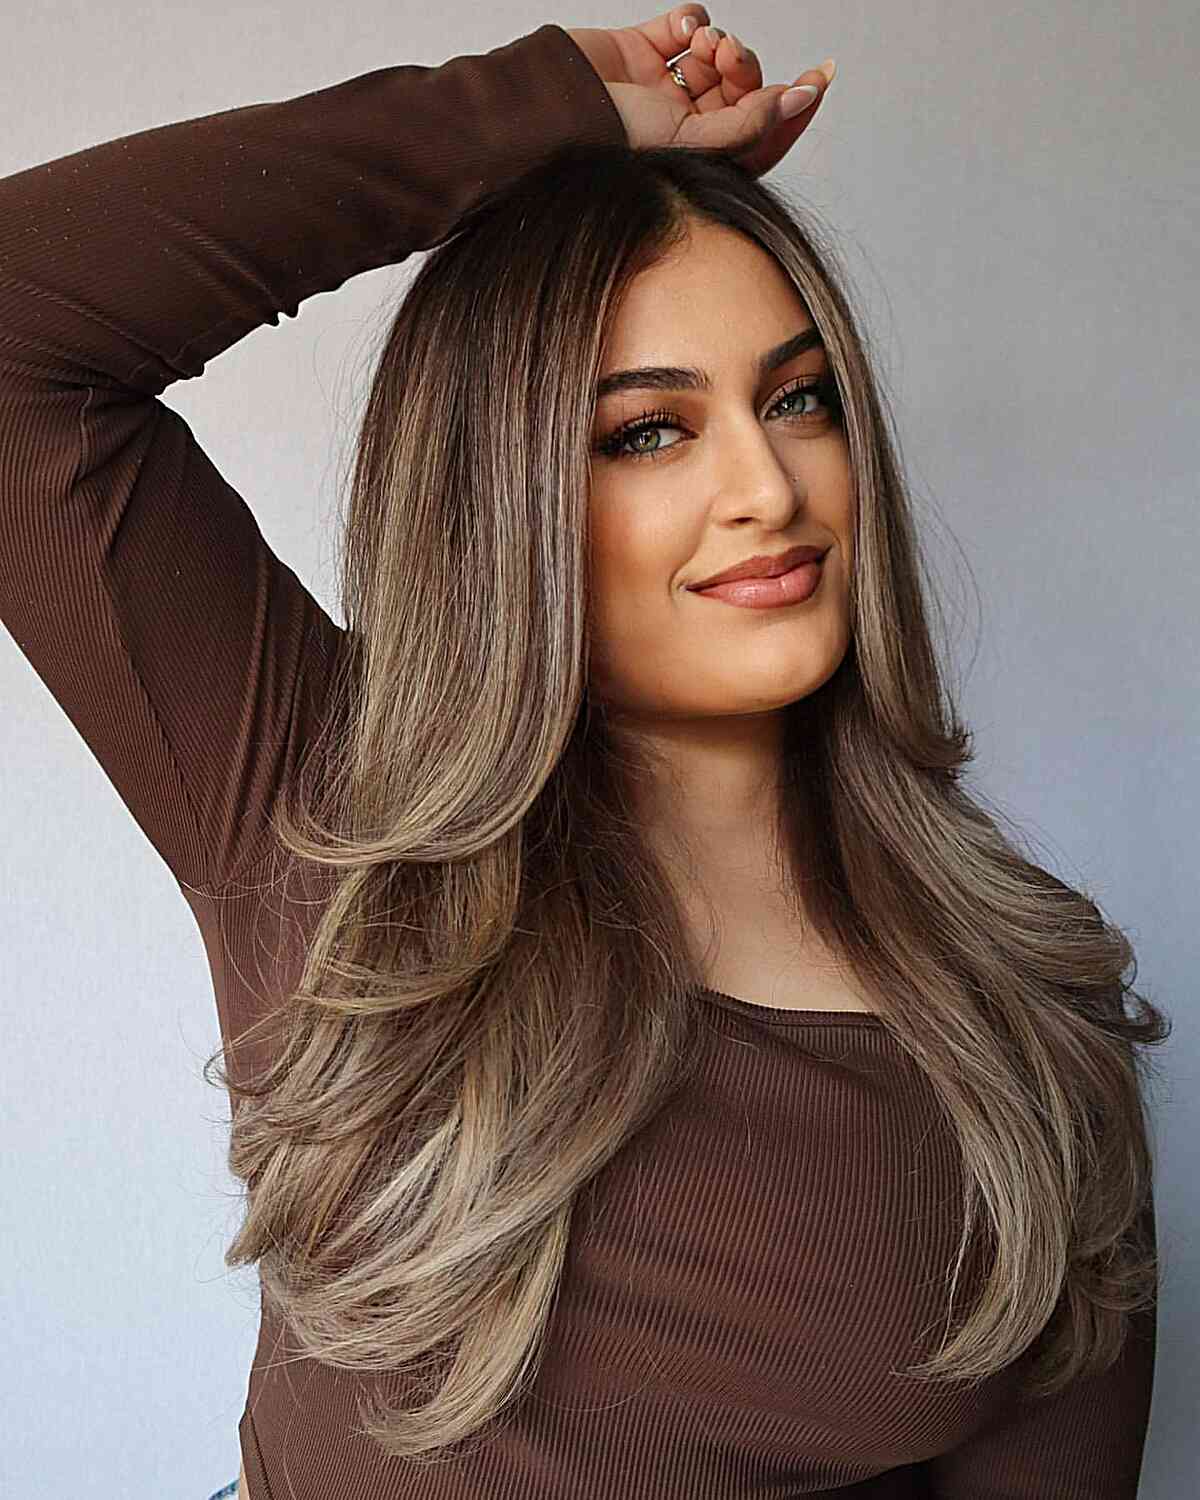 66 Stunning Brown Balayage Hair Color Ideas You Don&#039;t Want to Miss